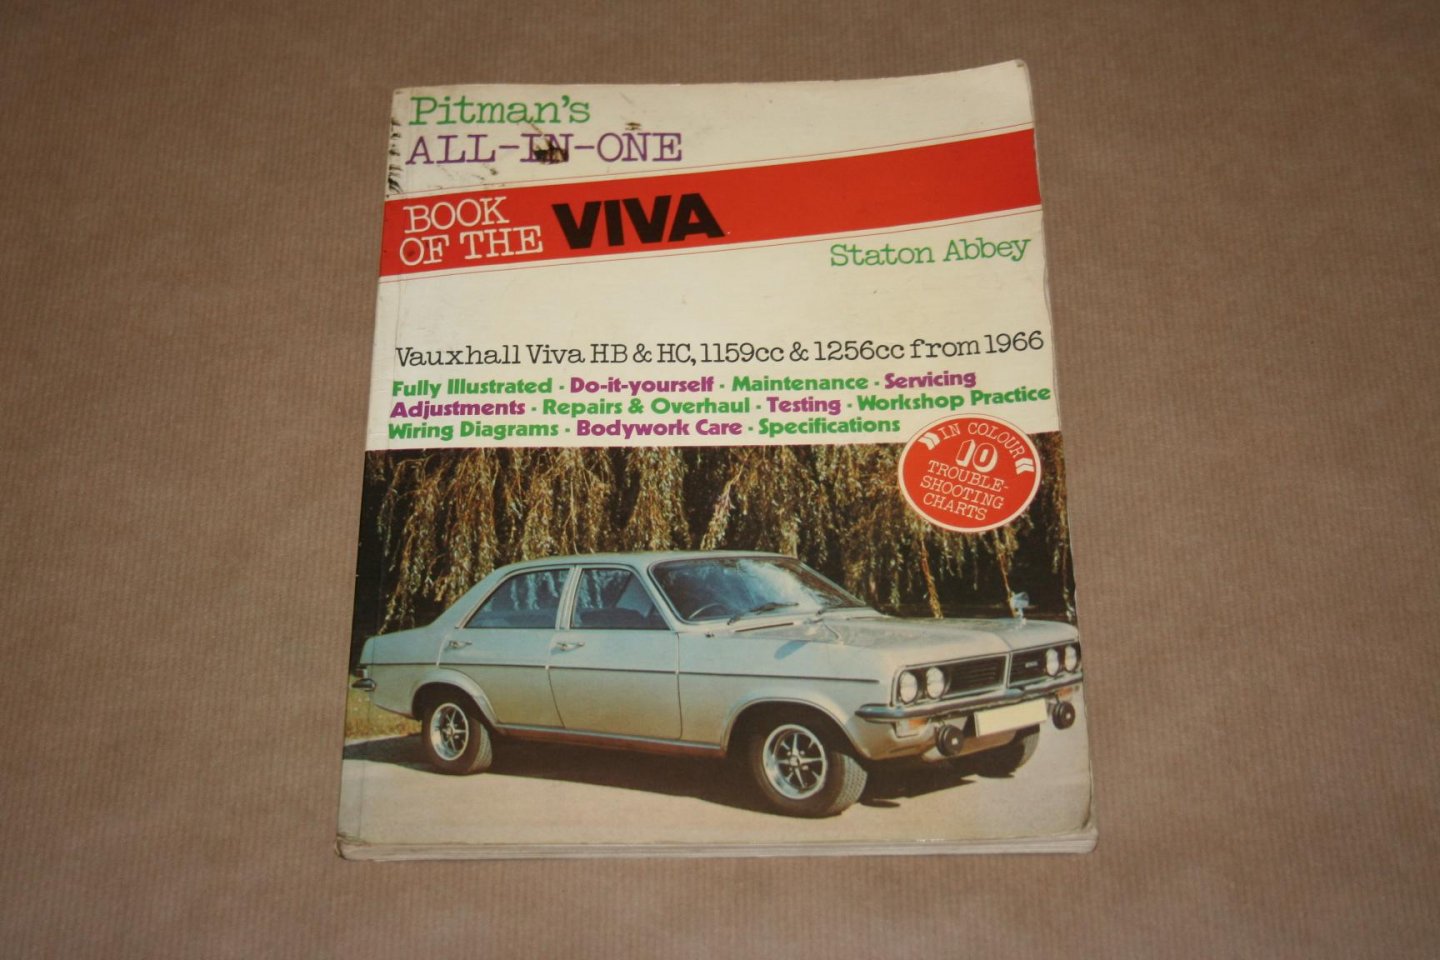  - All-in-one book of the Vauxhall Viva (HB and HC 1159cc and 1256cc Staton Abbey)